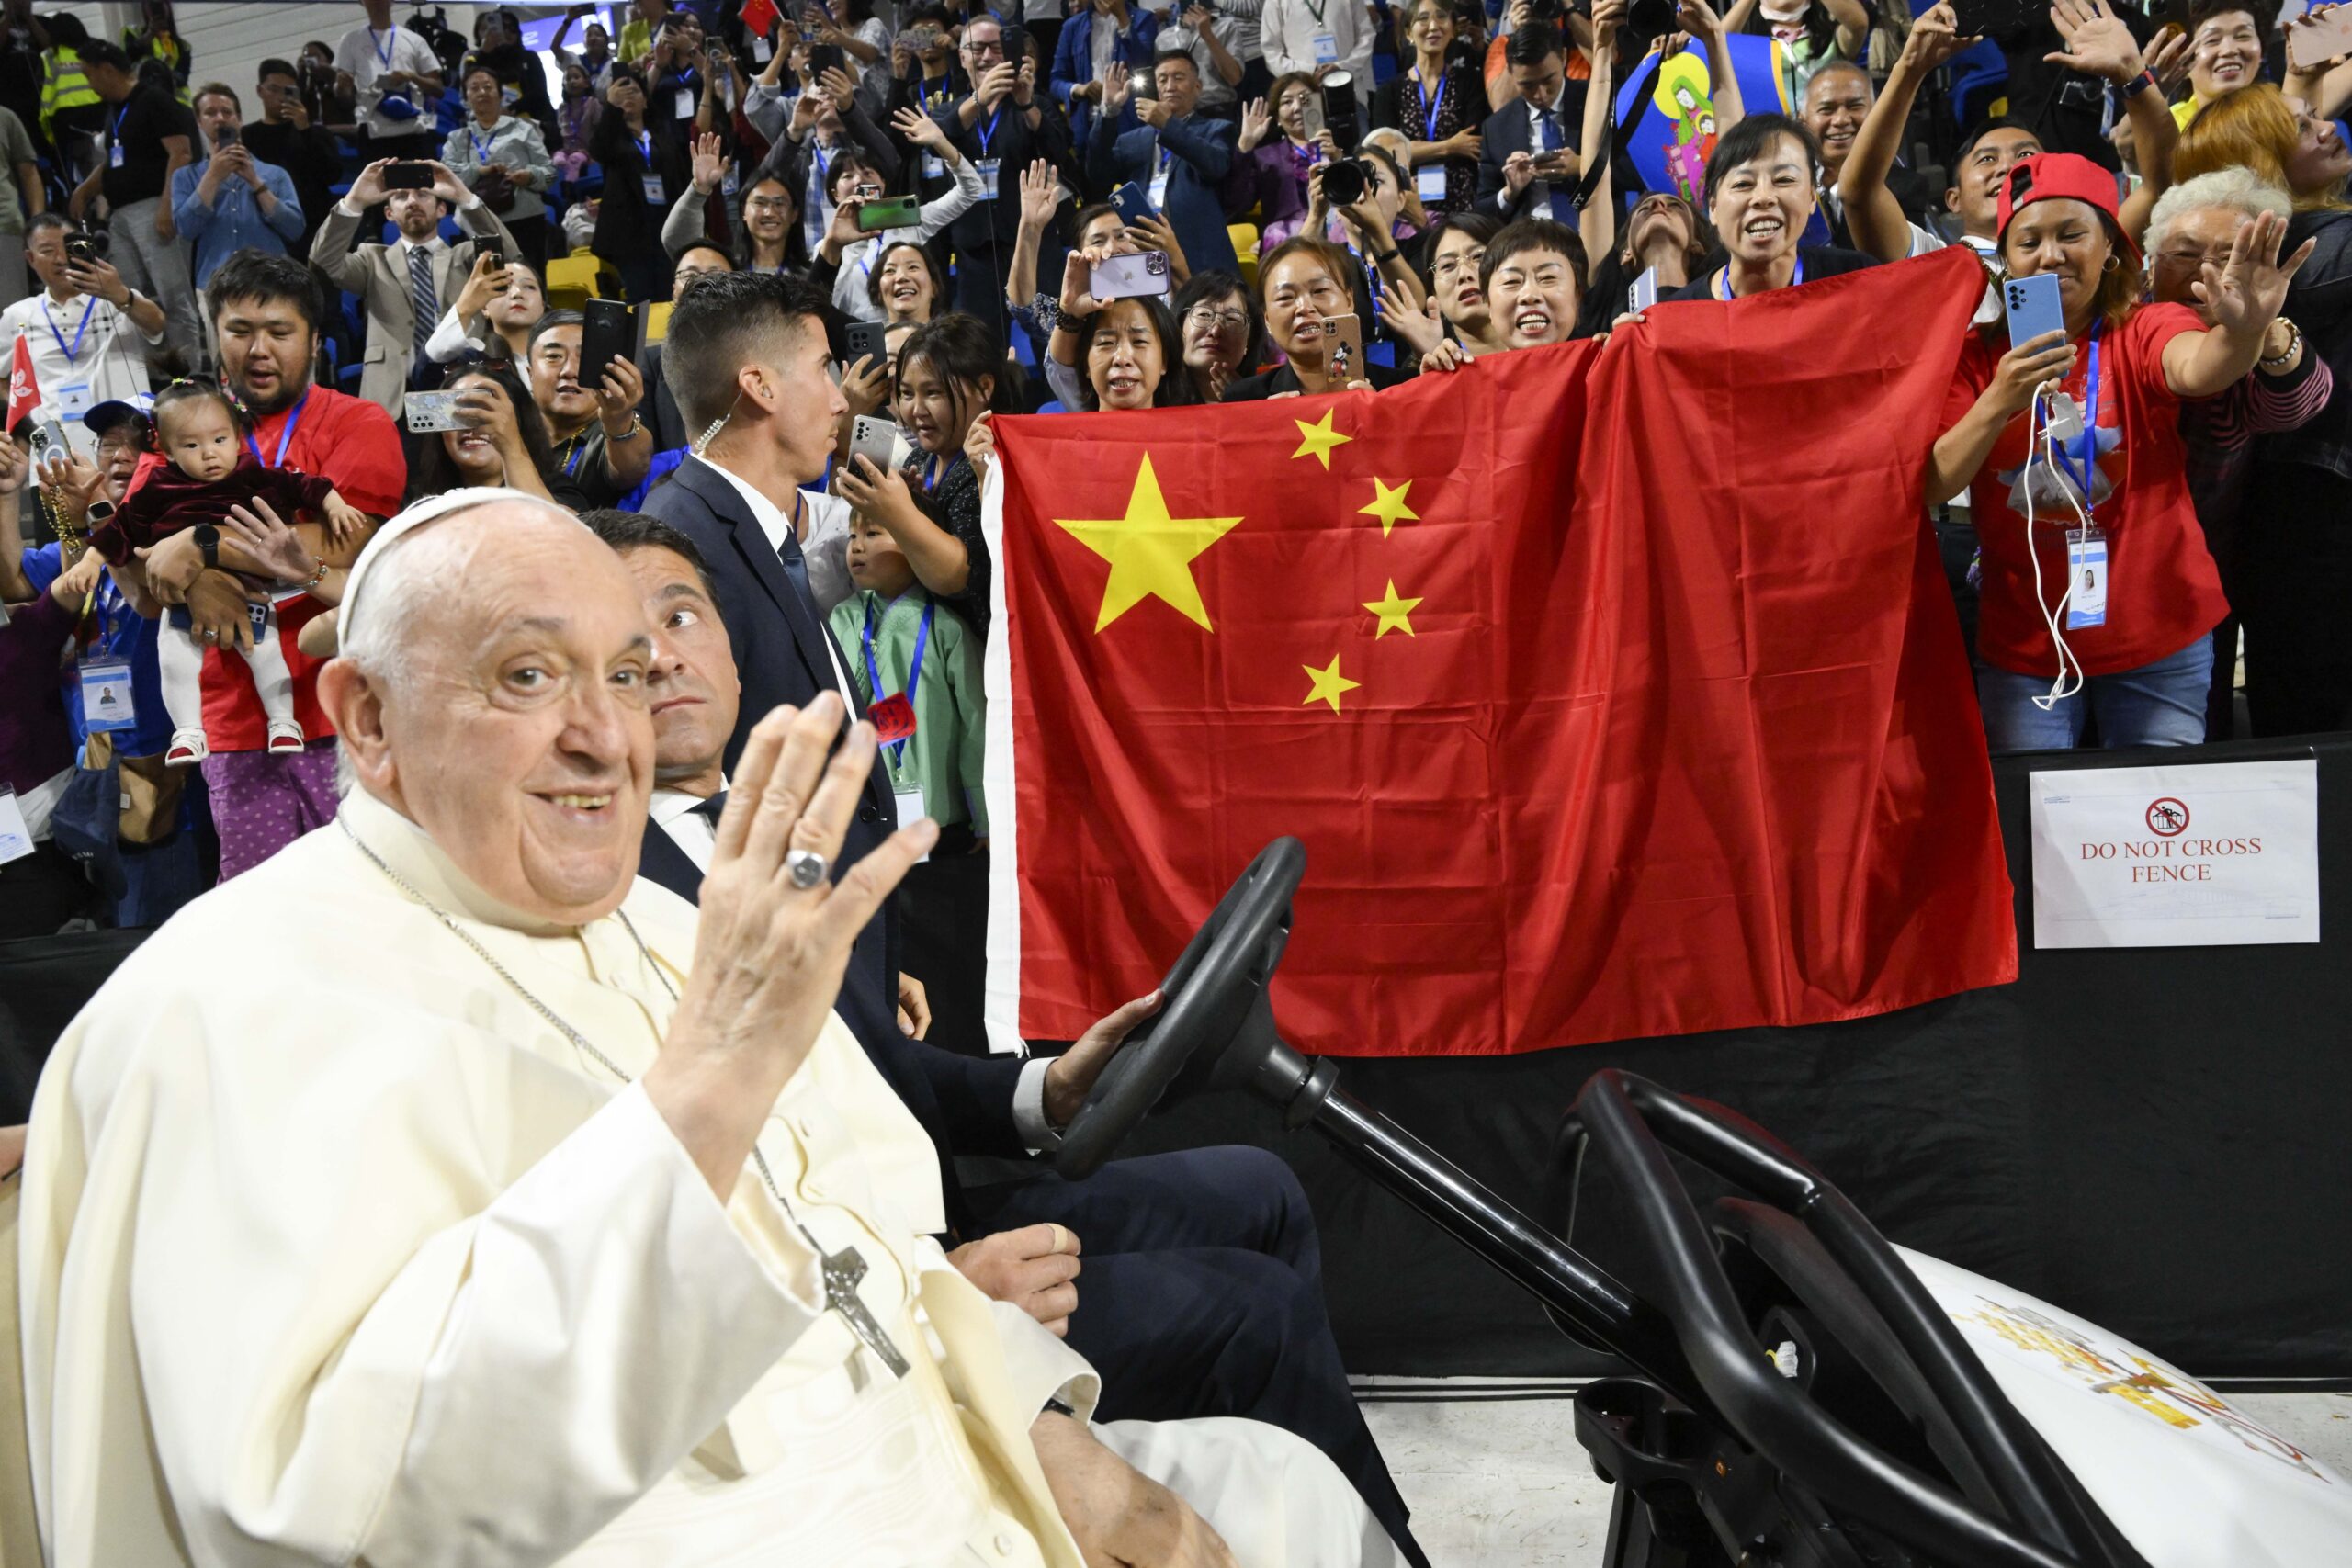 Pope appoints new bishop in China, bringing a 70-year vacancy to an end